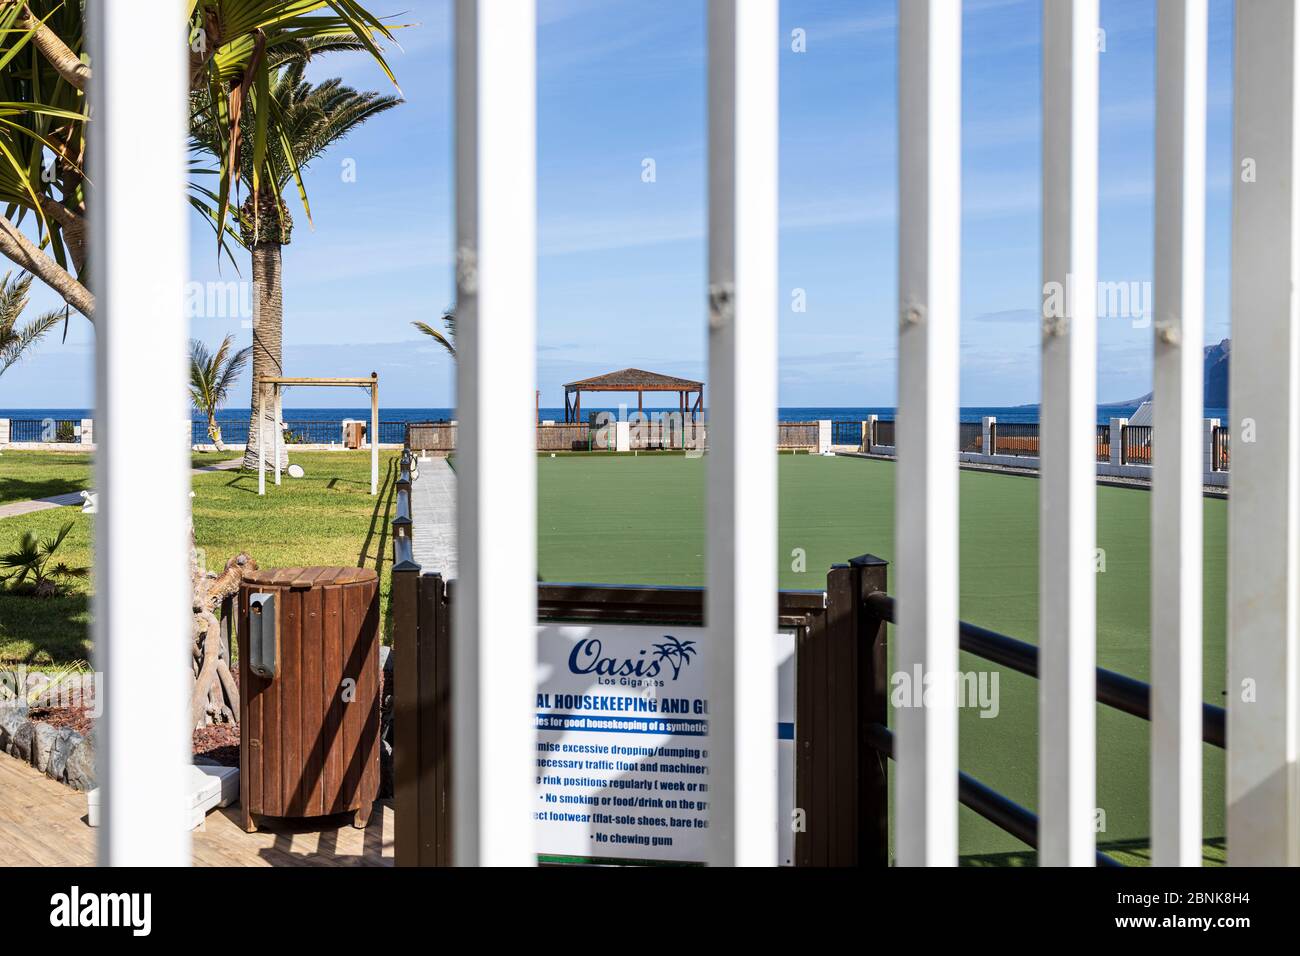 The Oasis bowling green and swimming pool deserted and closed during the Covid 19, Coronavirus lockdown, Los Gigantes, Tenerife, Canary Islands, Spain Stock Photo